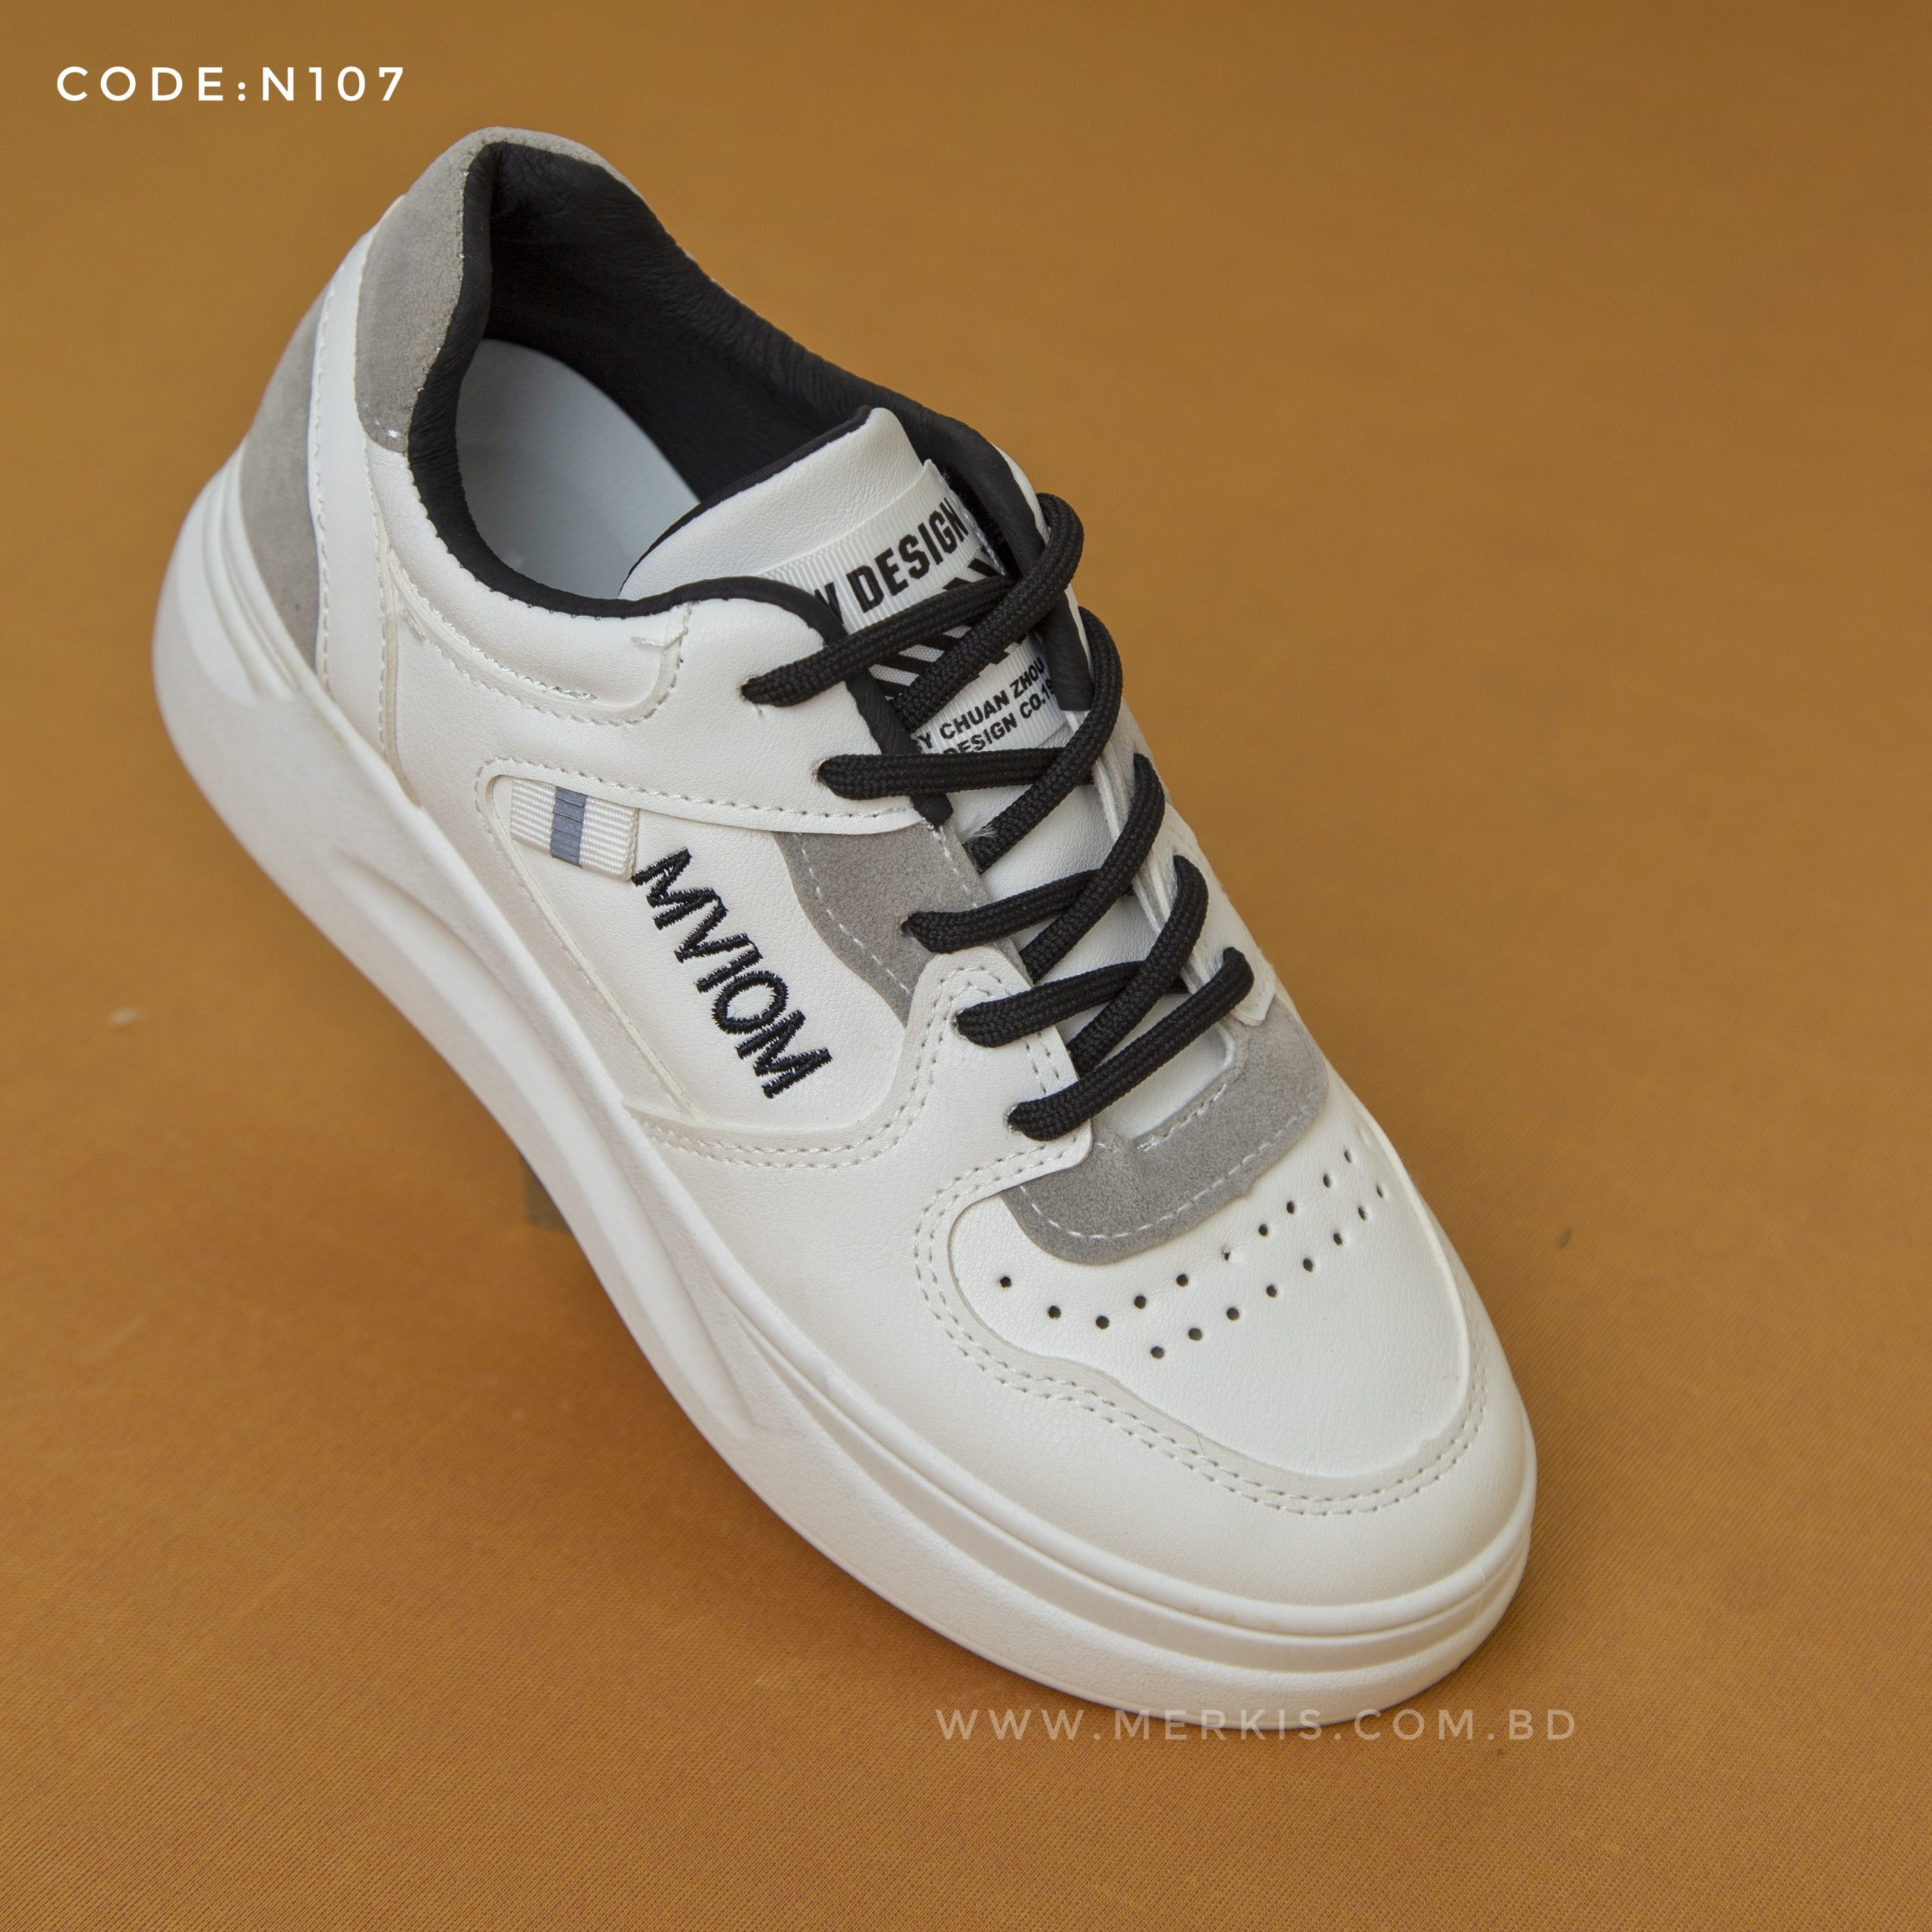 Premium quality white sneakers for women at a reasonable price